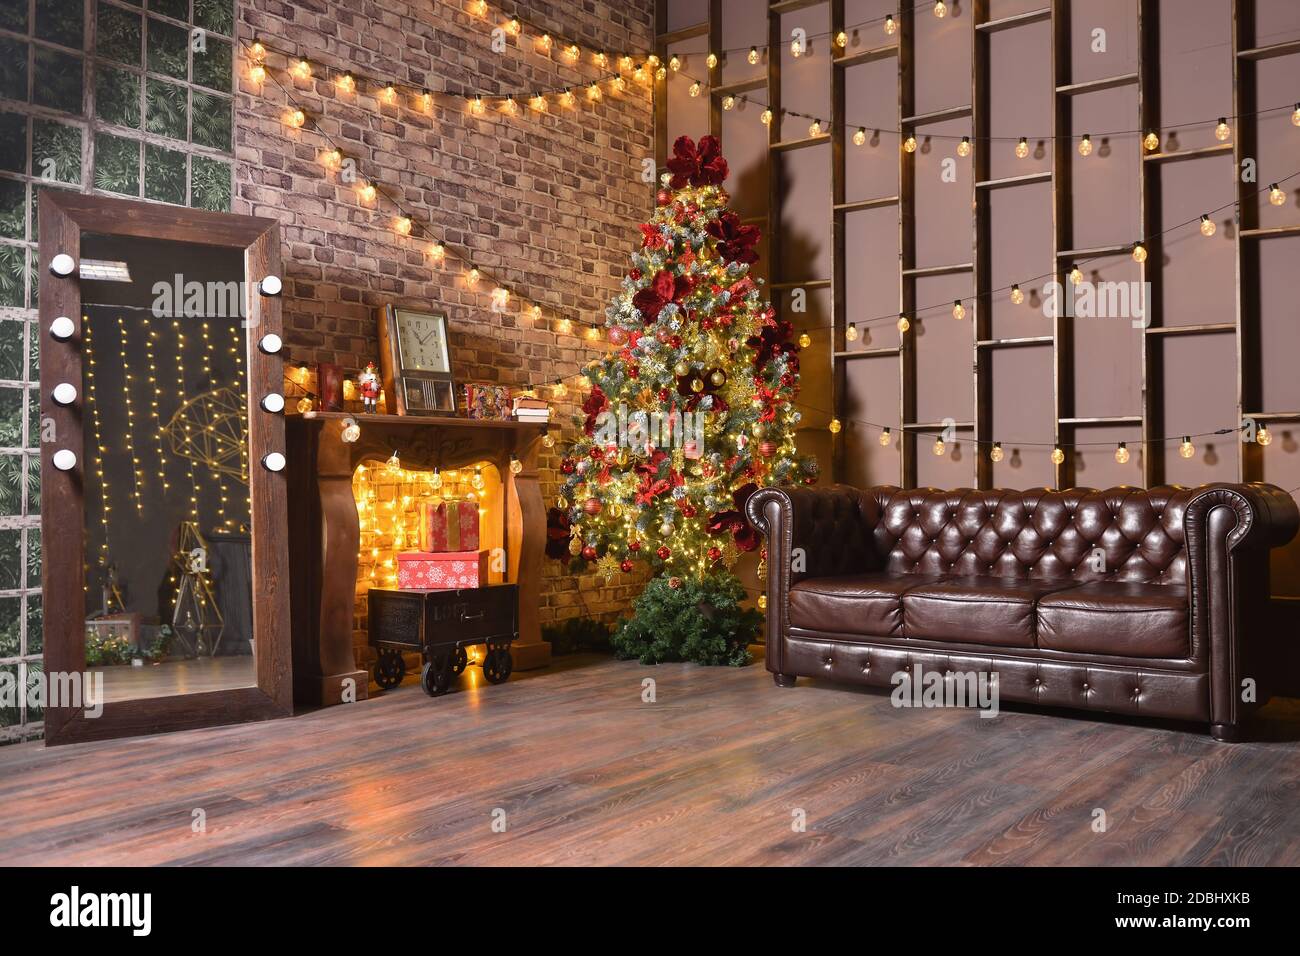 Stylish Christmas loft decorations in a brown living room with a leather sofa, Christmas tree and garlands with light bulbs on the wall Stock Photo